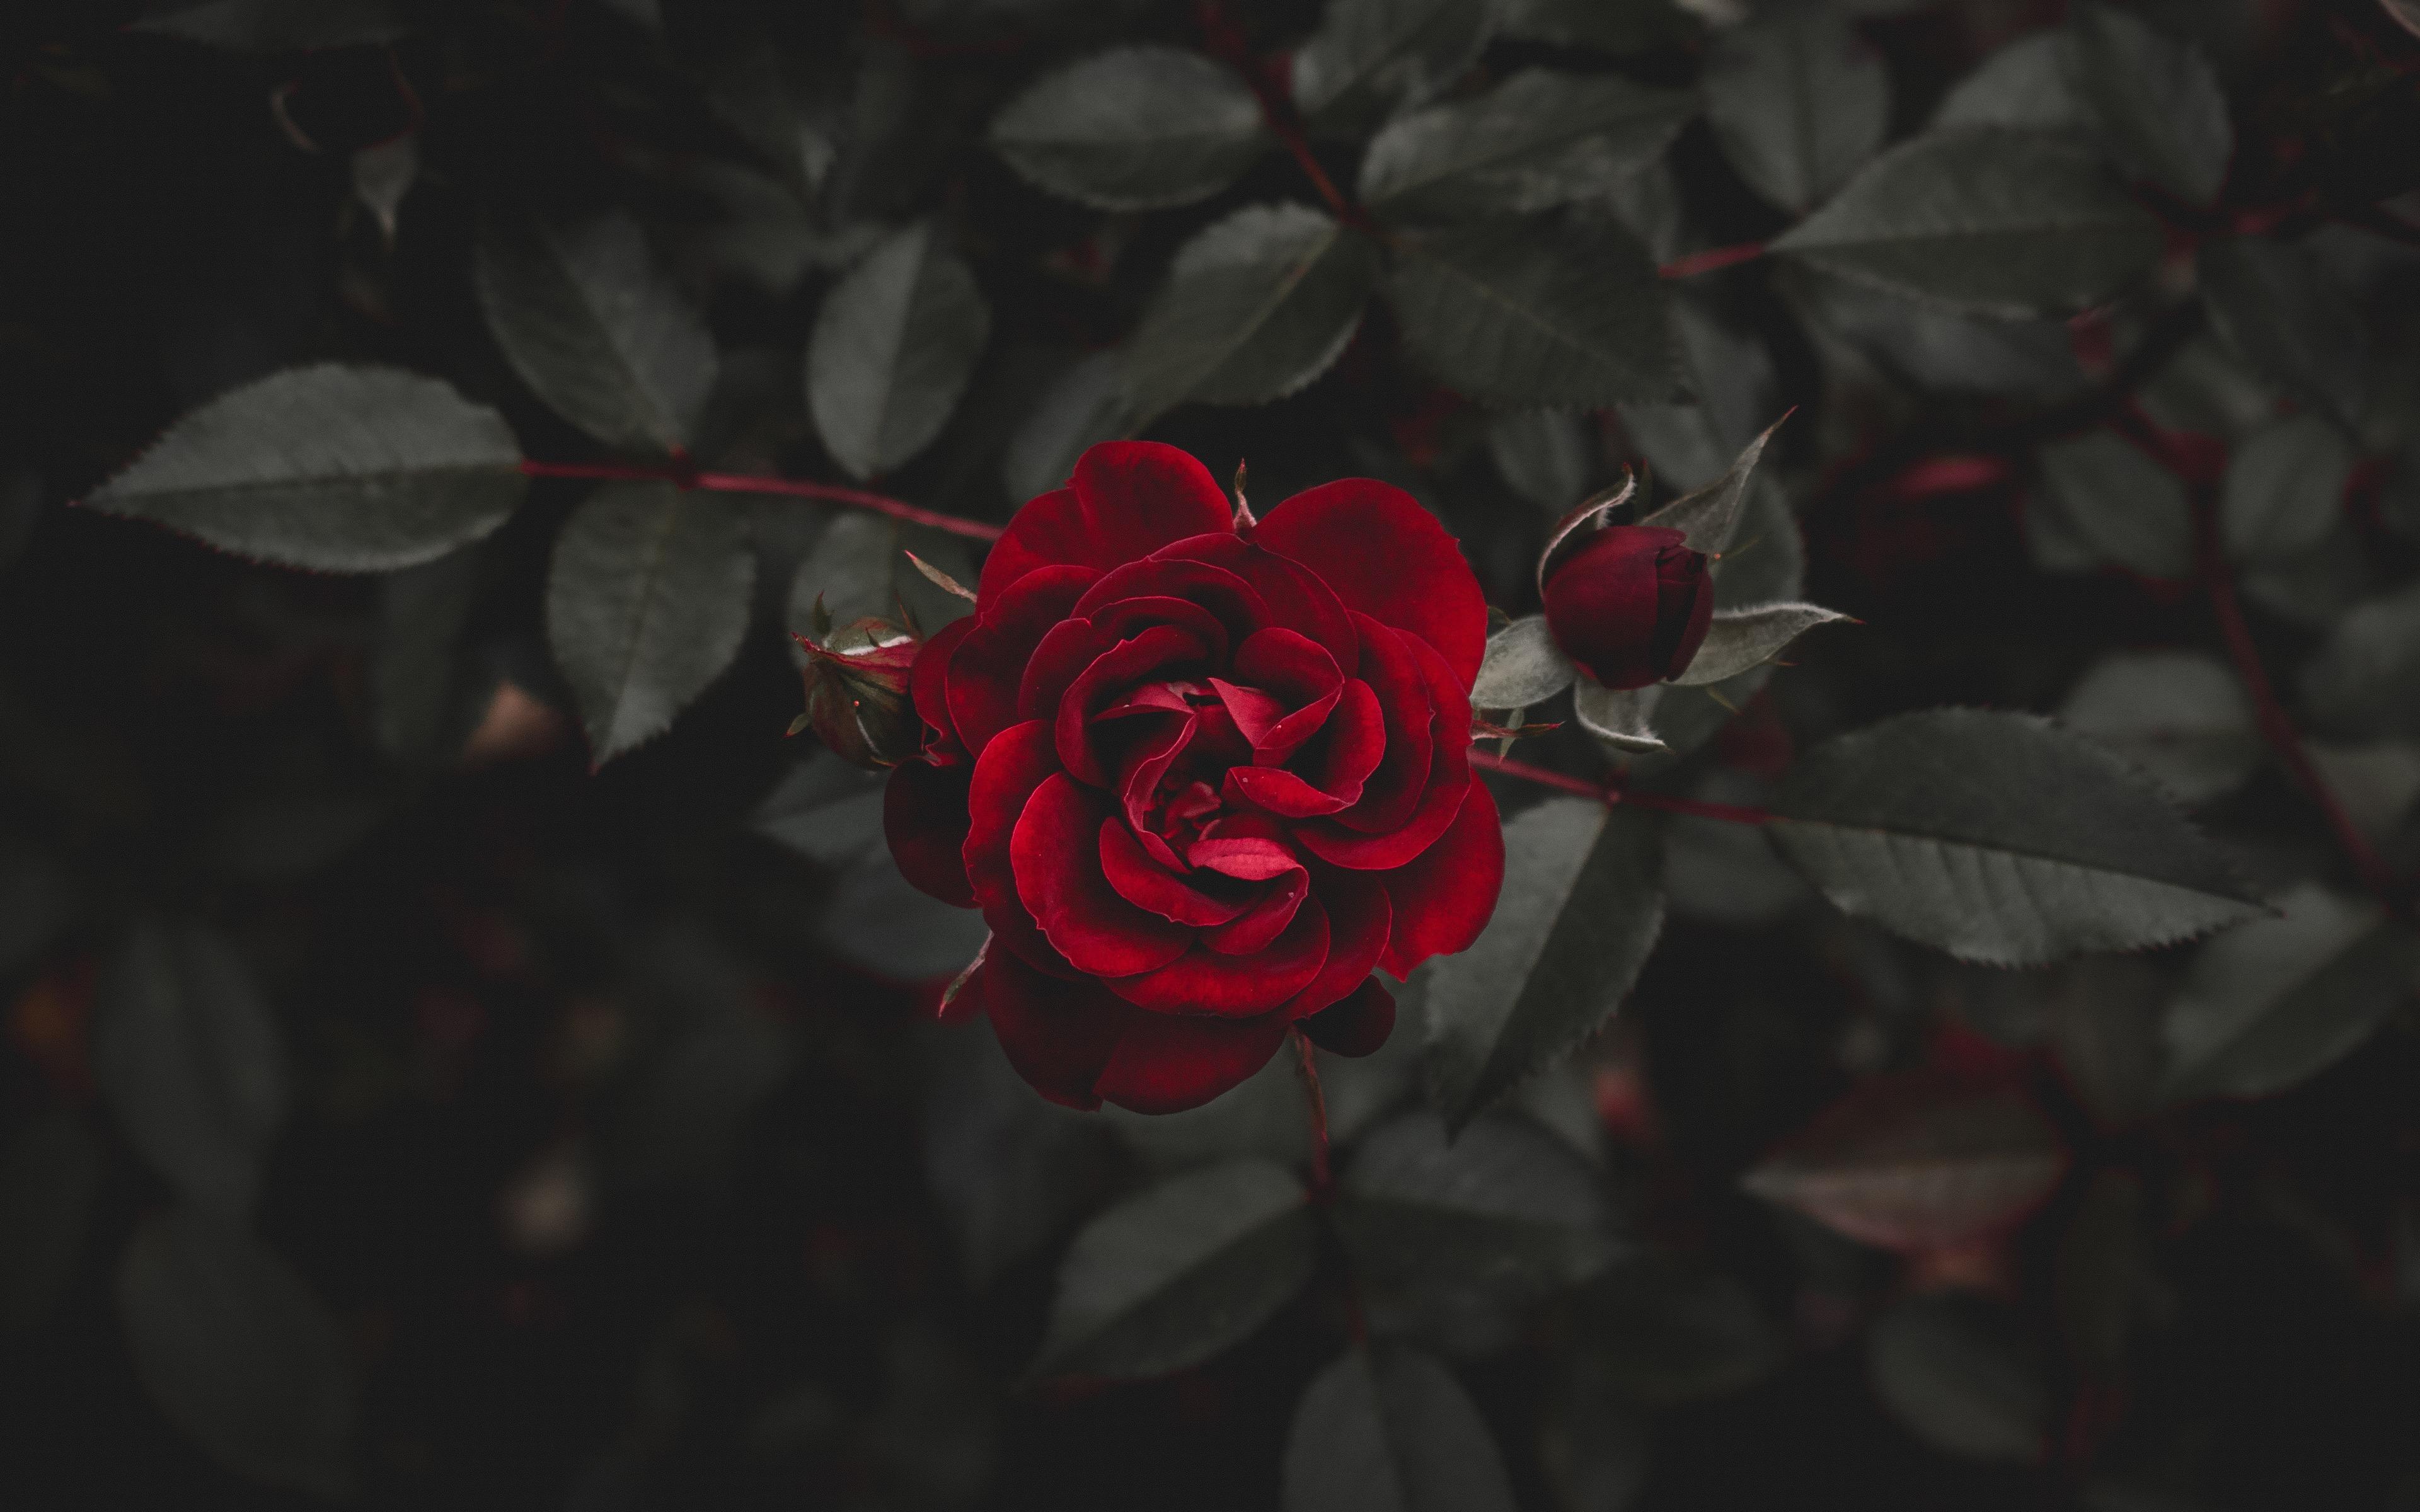 Red roses are beauty 4k Ultra HD Wallpaper